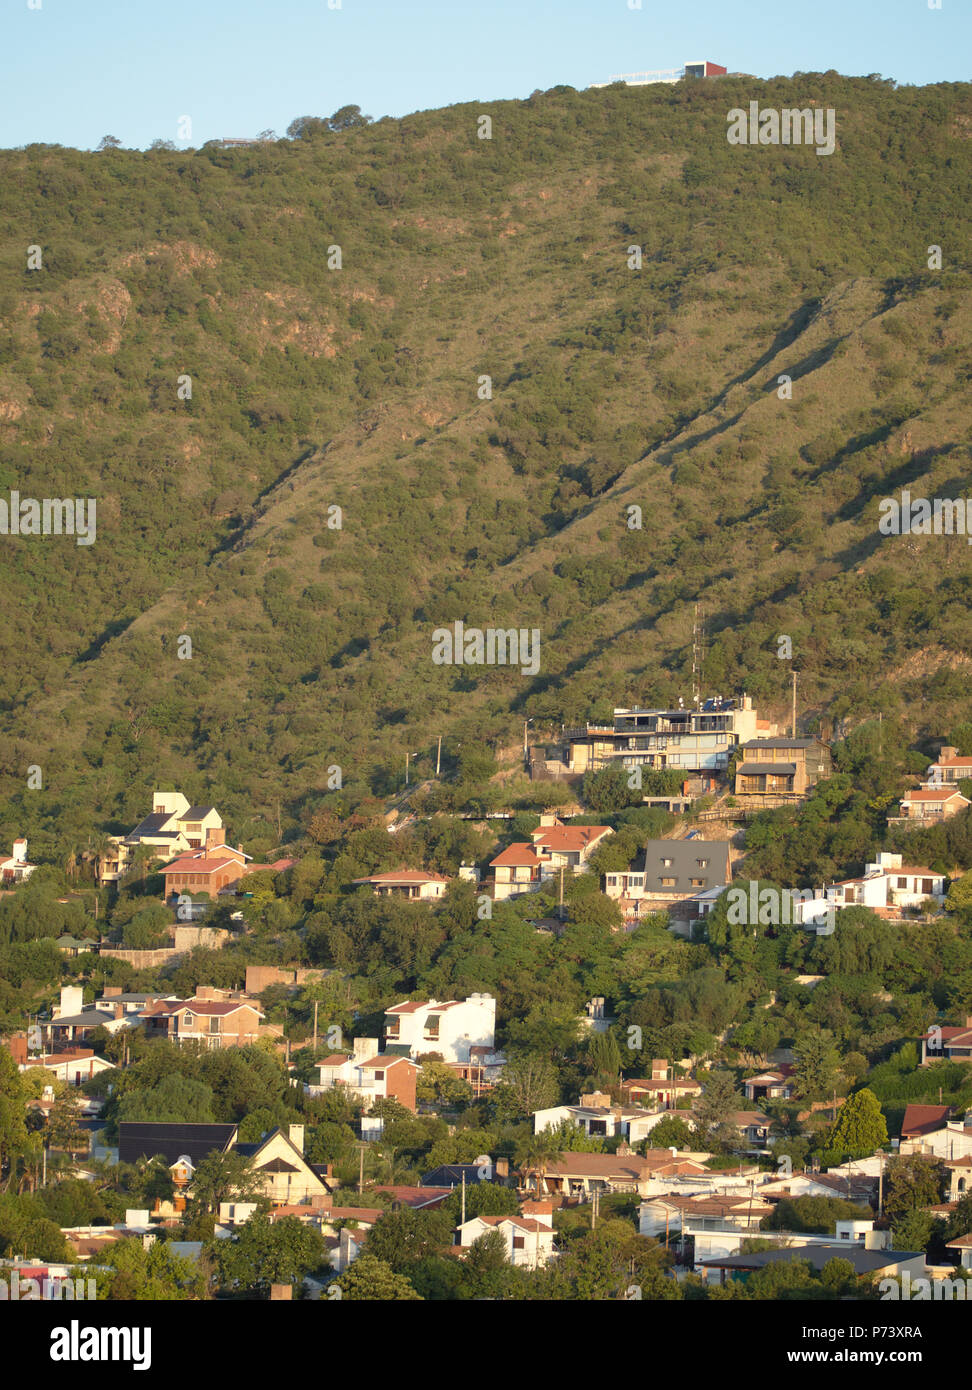 Villa Carlos Paz, Cordoba, Argentina - 2018: A neighborhood on the mountain slope of this touristic city, located in the Punilla Valley. Stock Photo